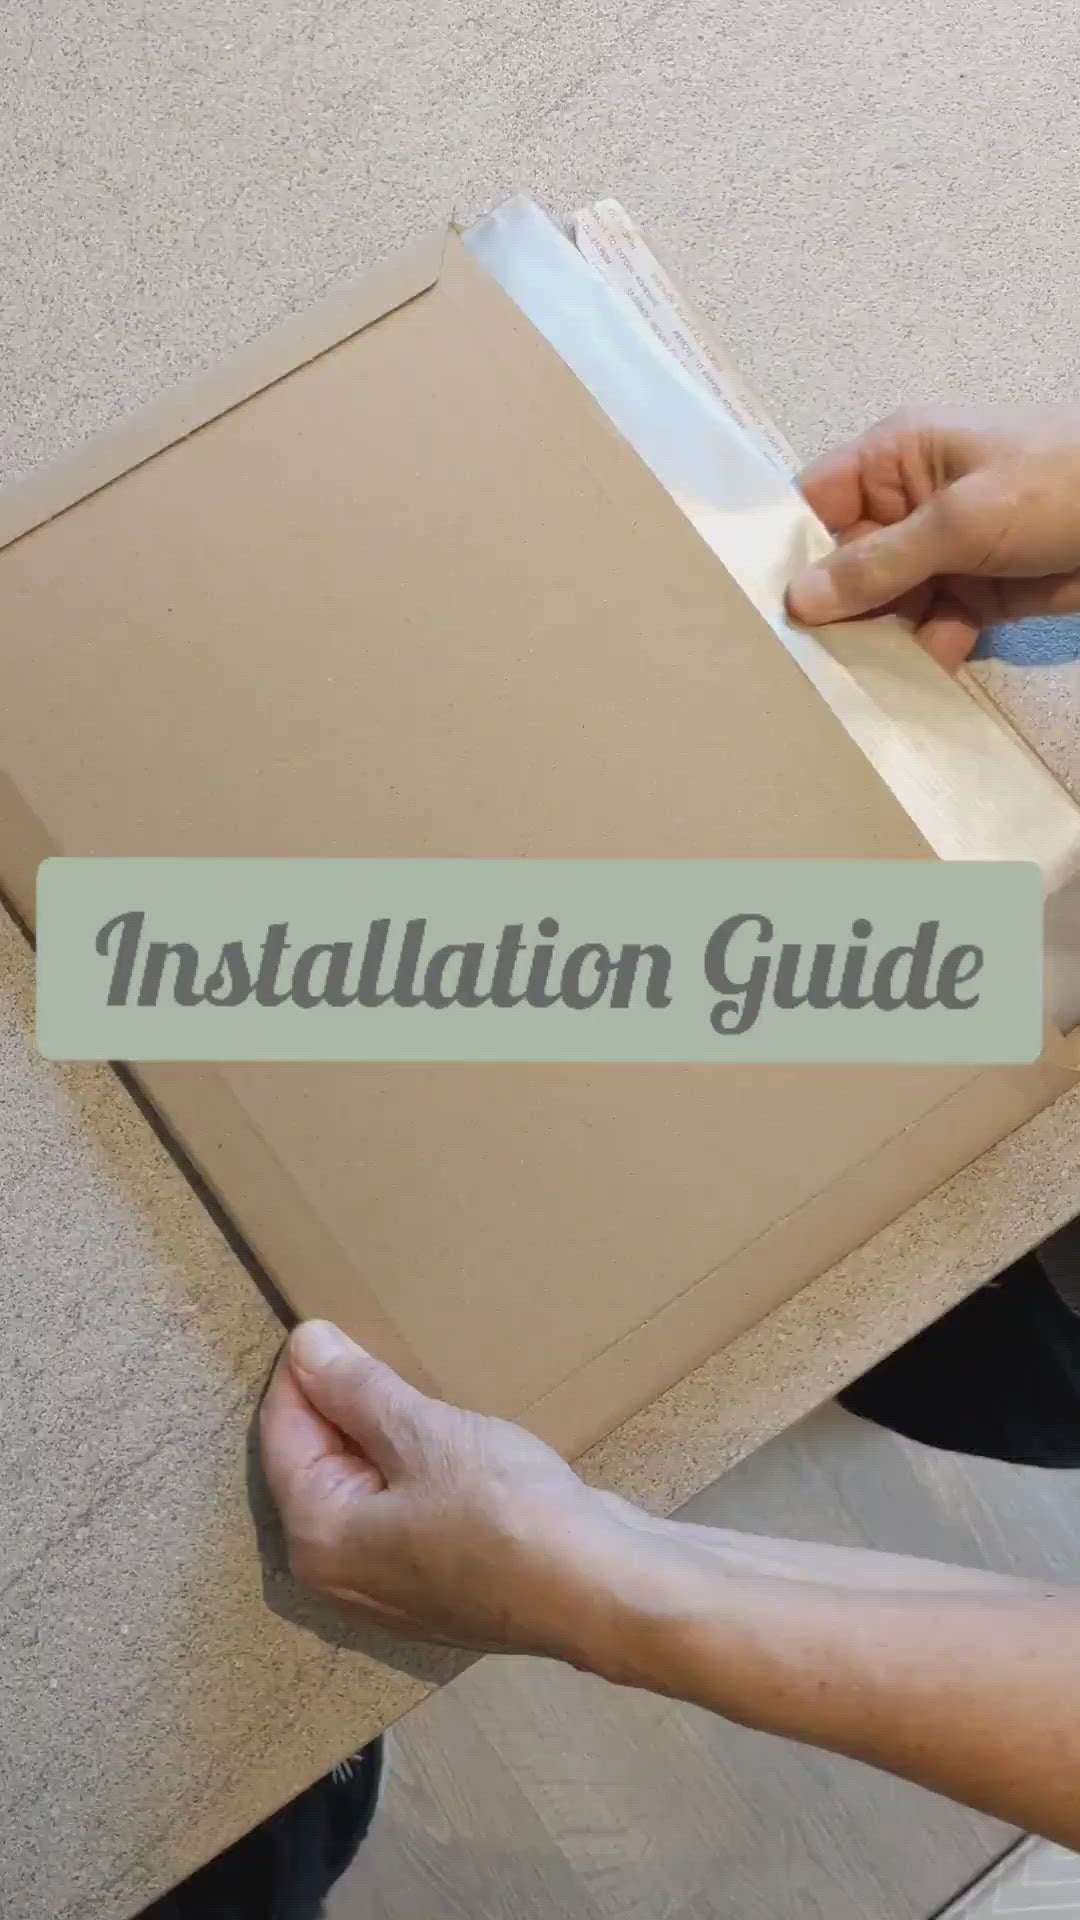 Installation video, step by step guide,how to video